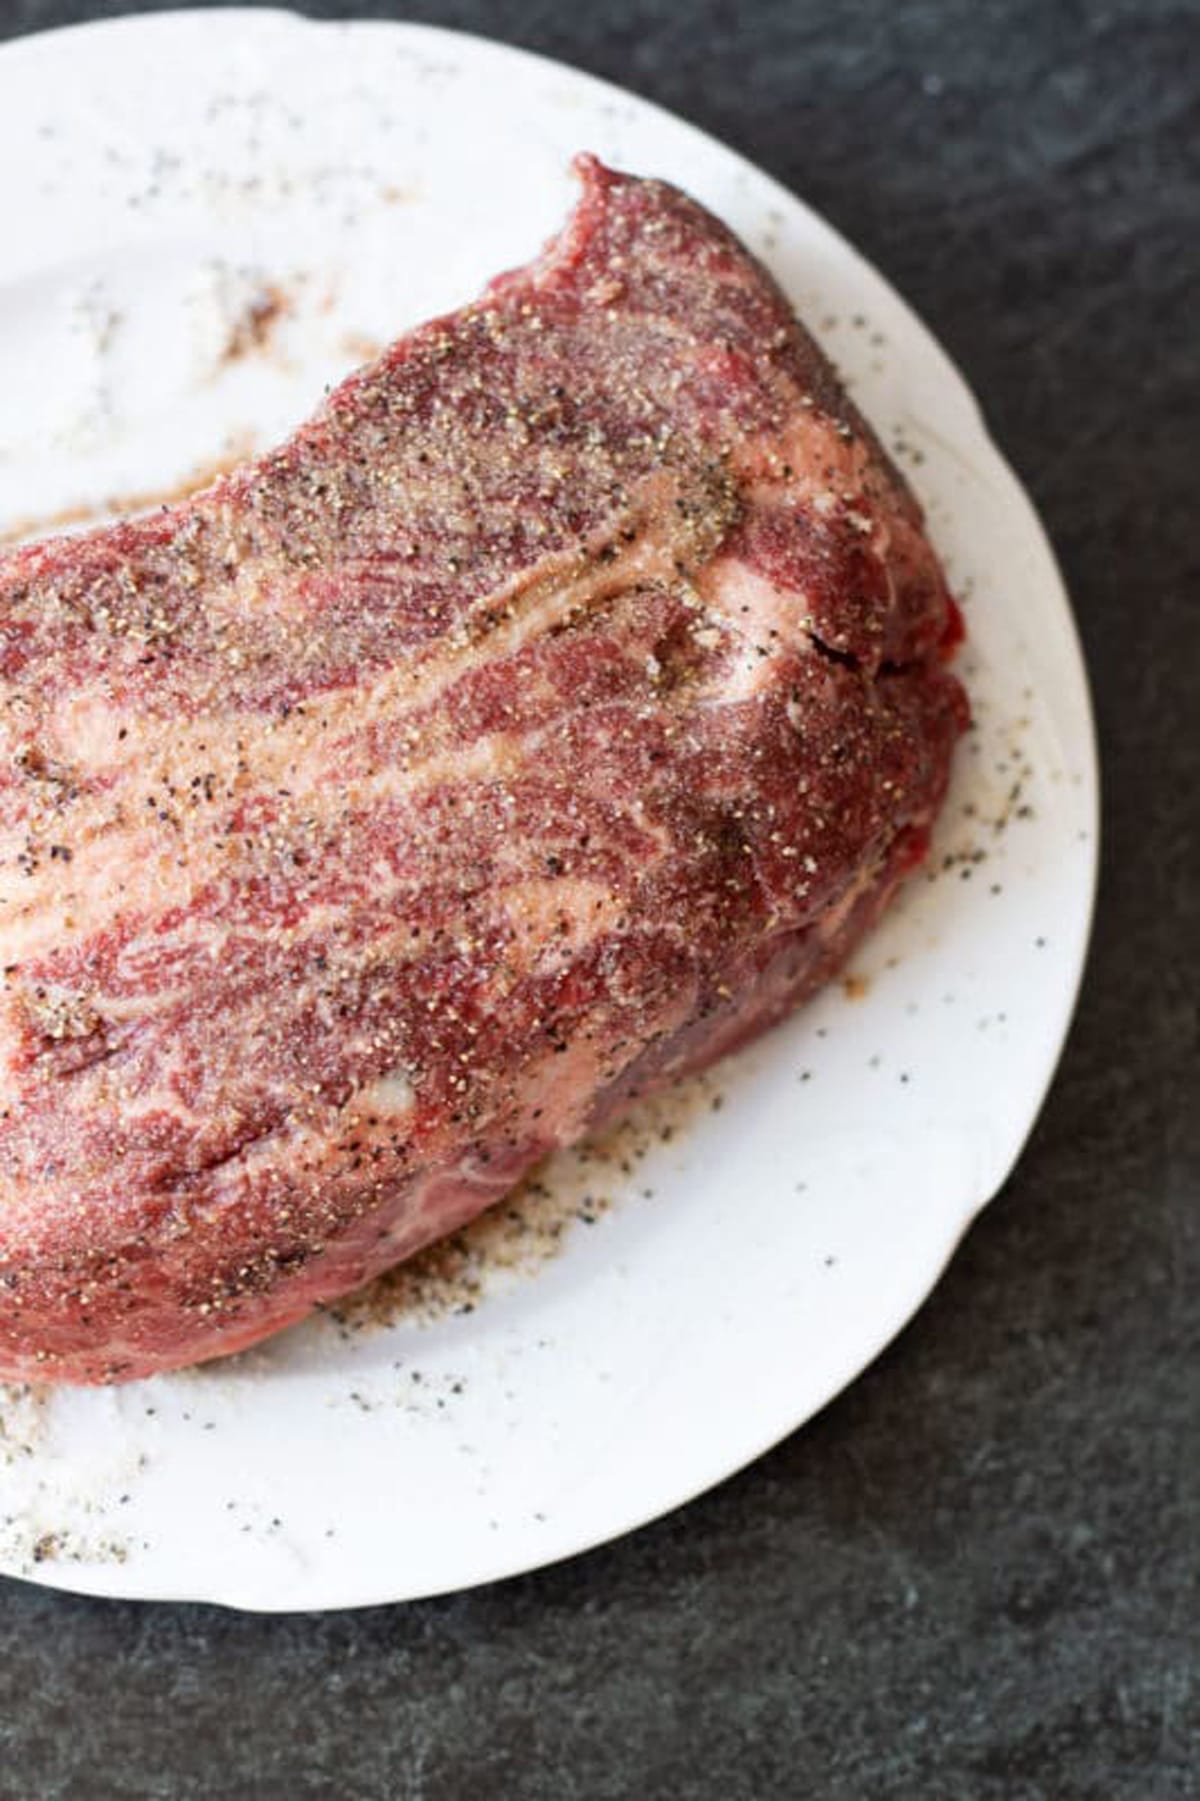 Raw chuck roast covered in a dry rub containing salt, pepper, and garlic powder.